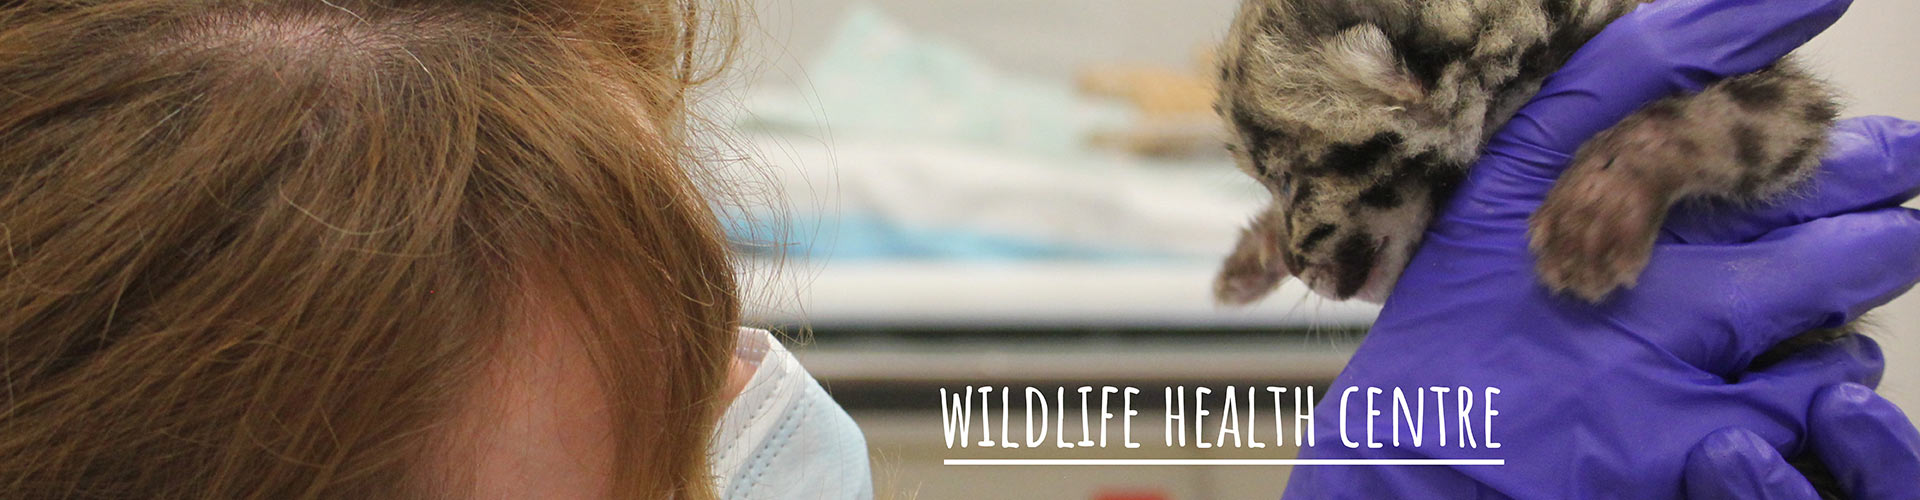 Wild Life Health Centre - Donors